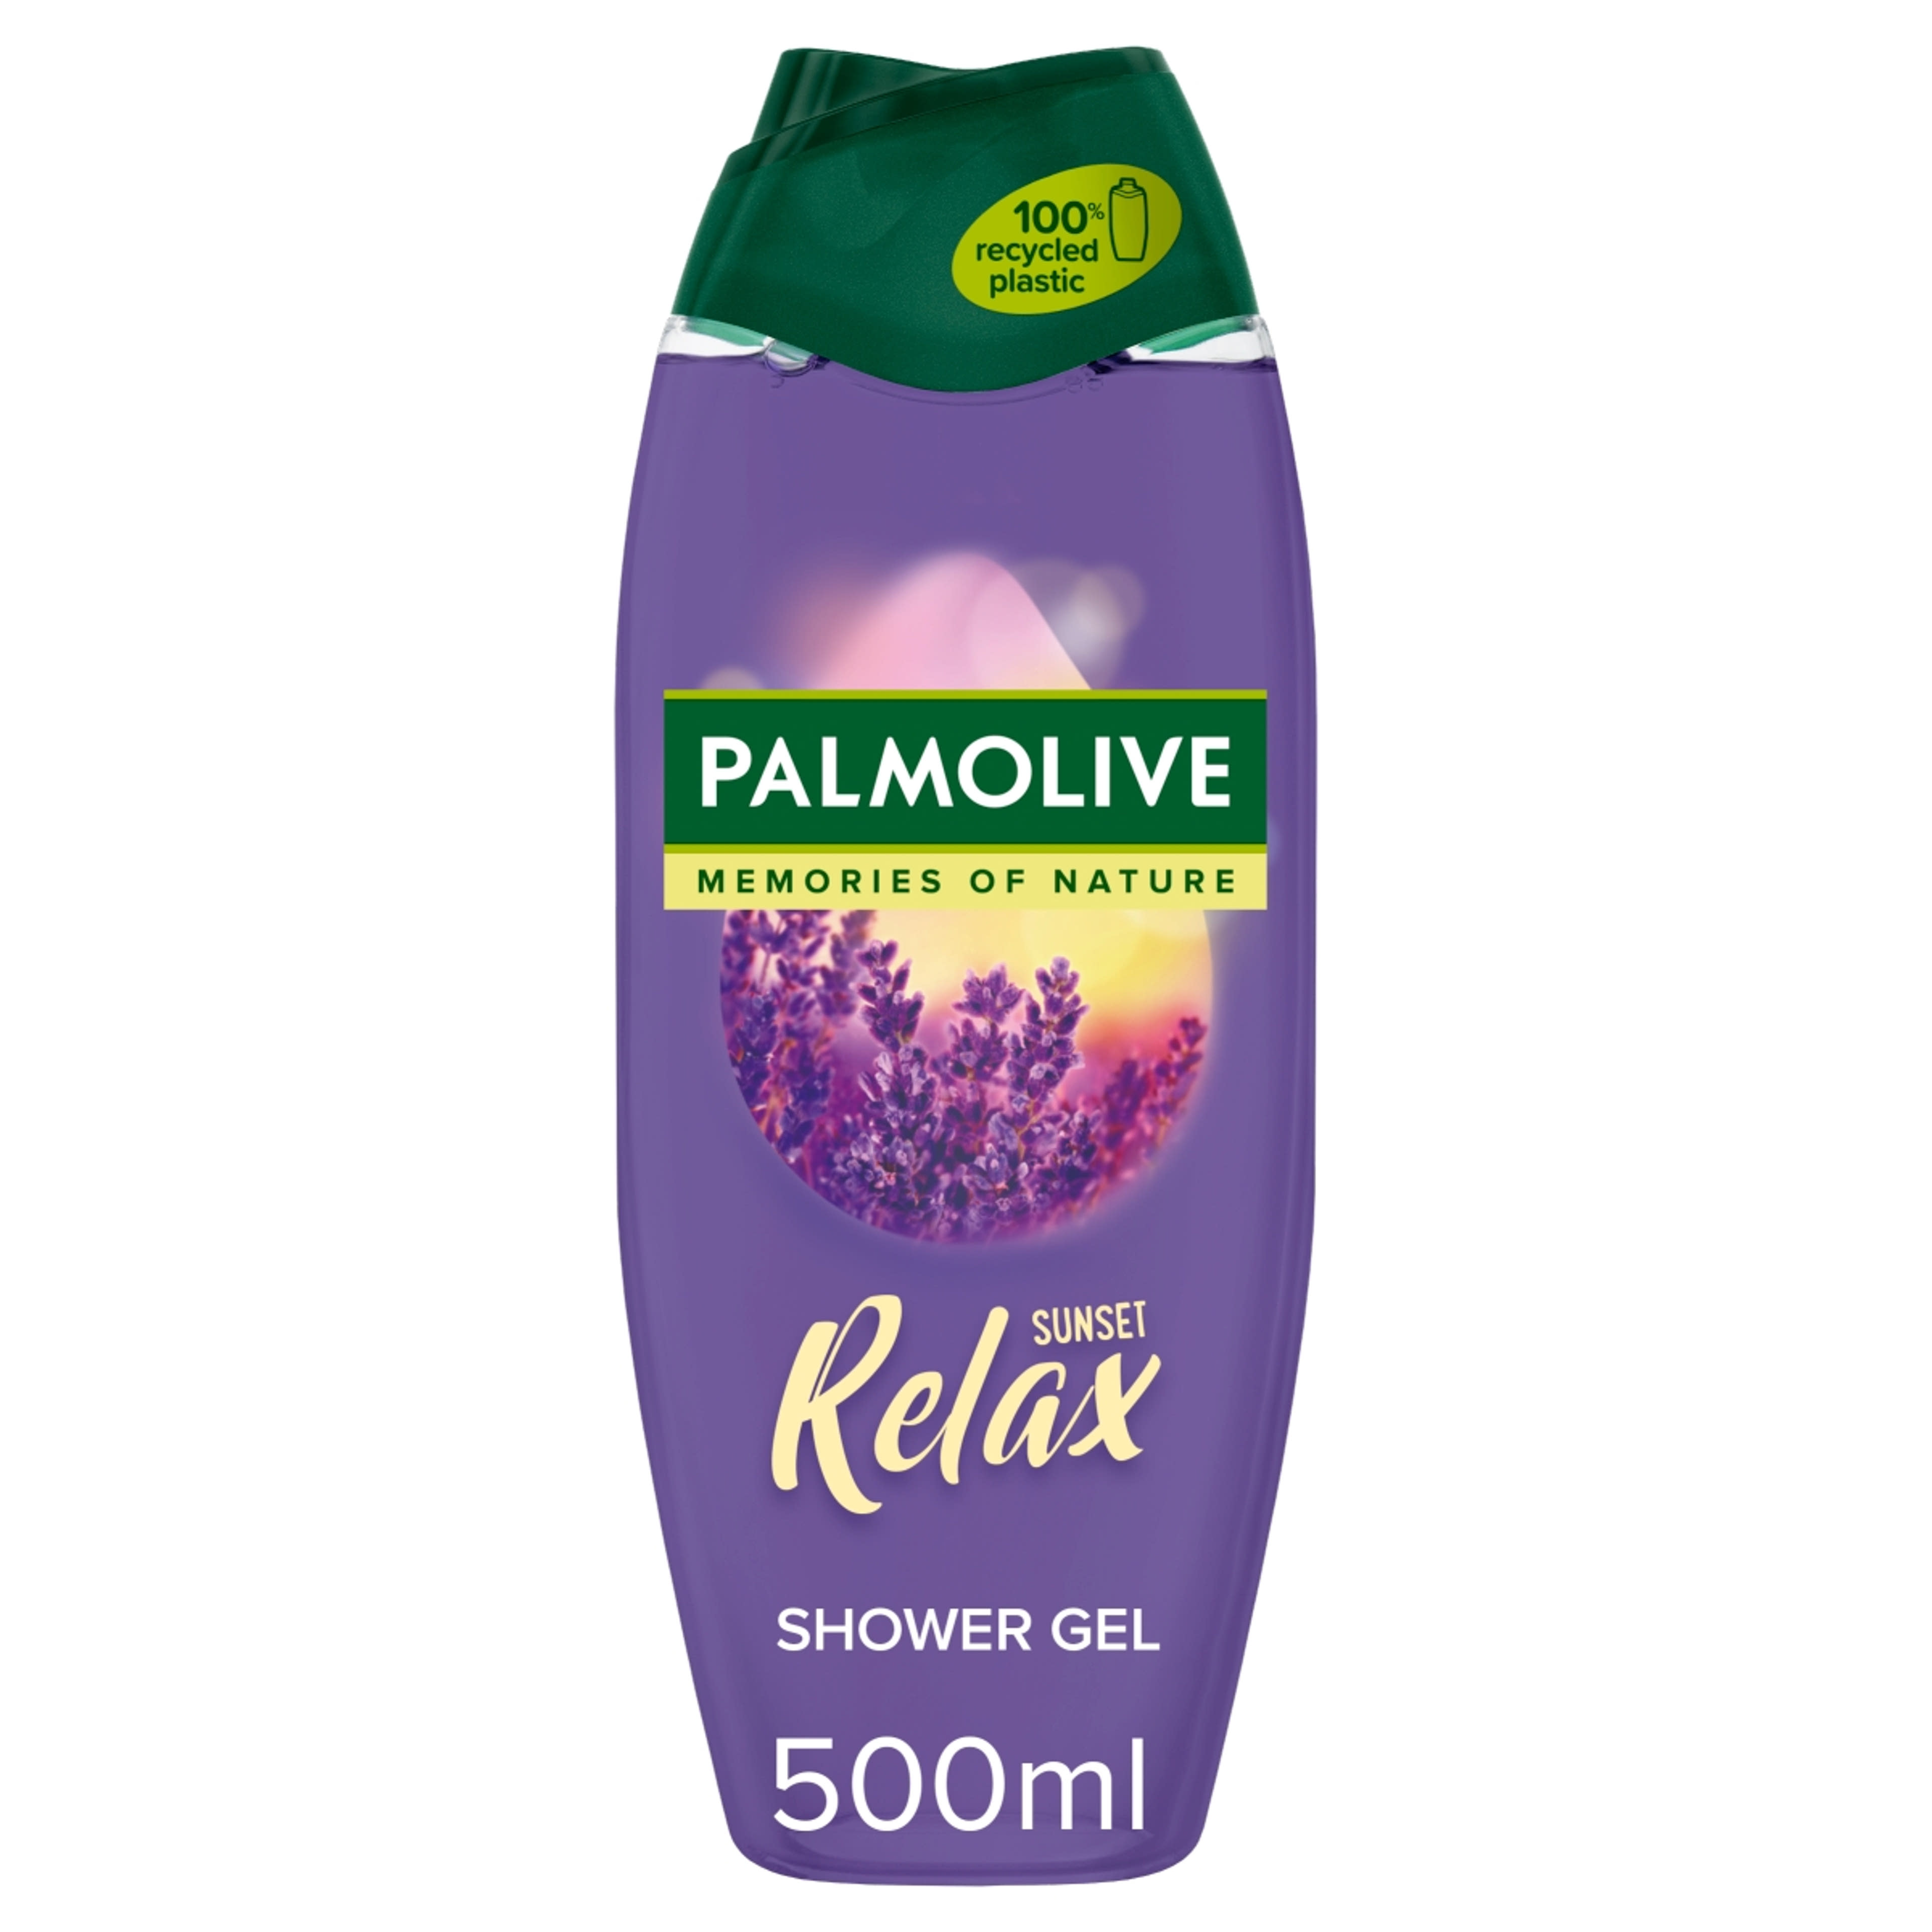 Palmolive Memories of Nature Sunset Relax tusfürdő - 500 ml-6